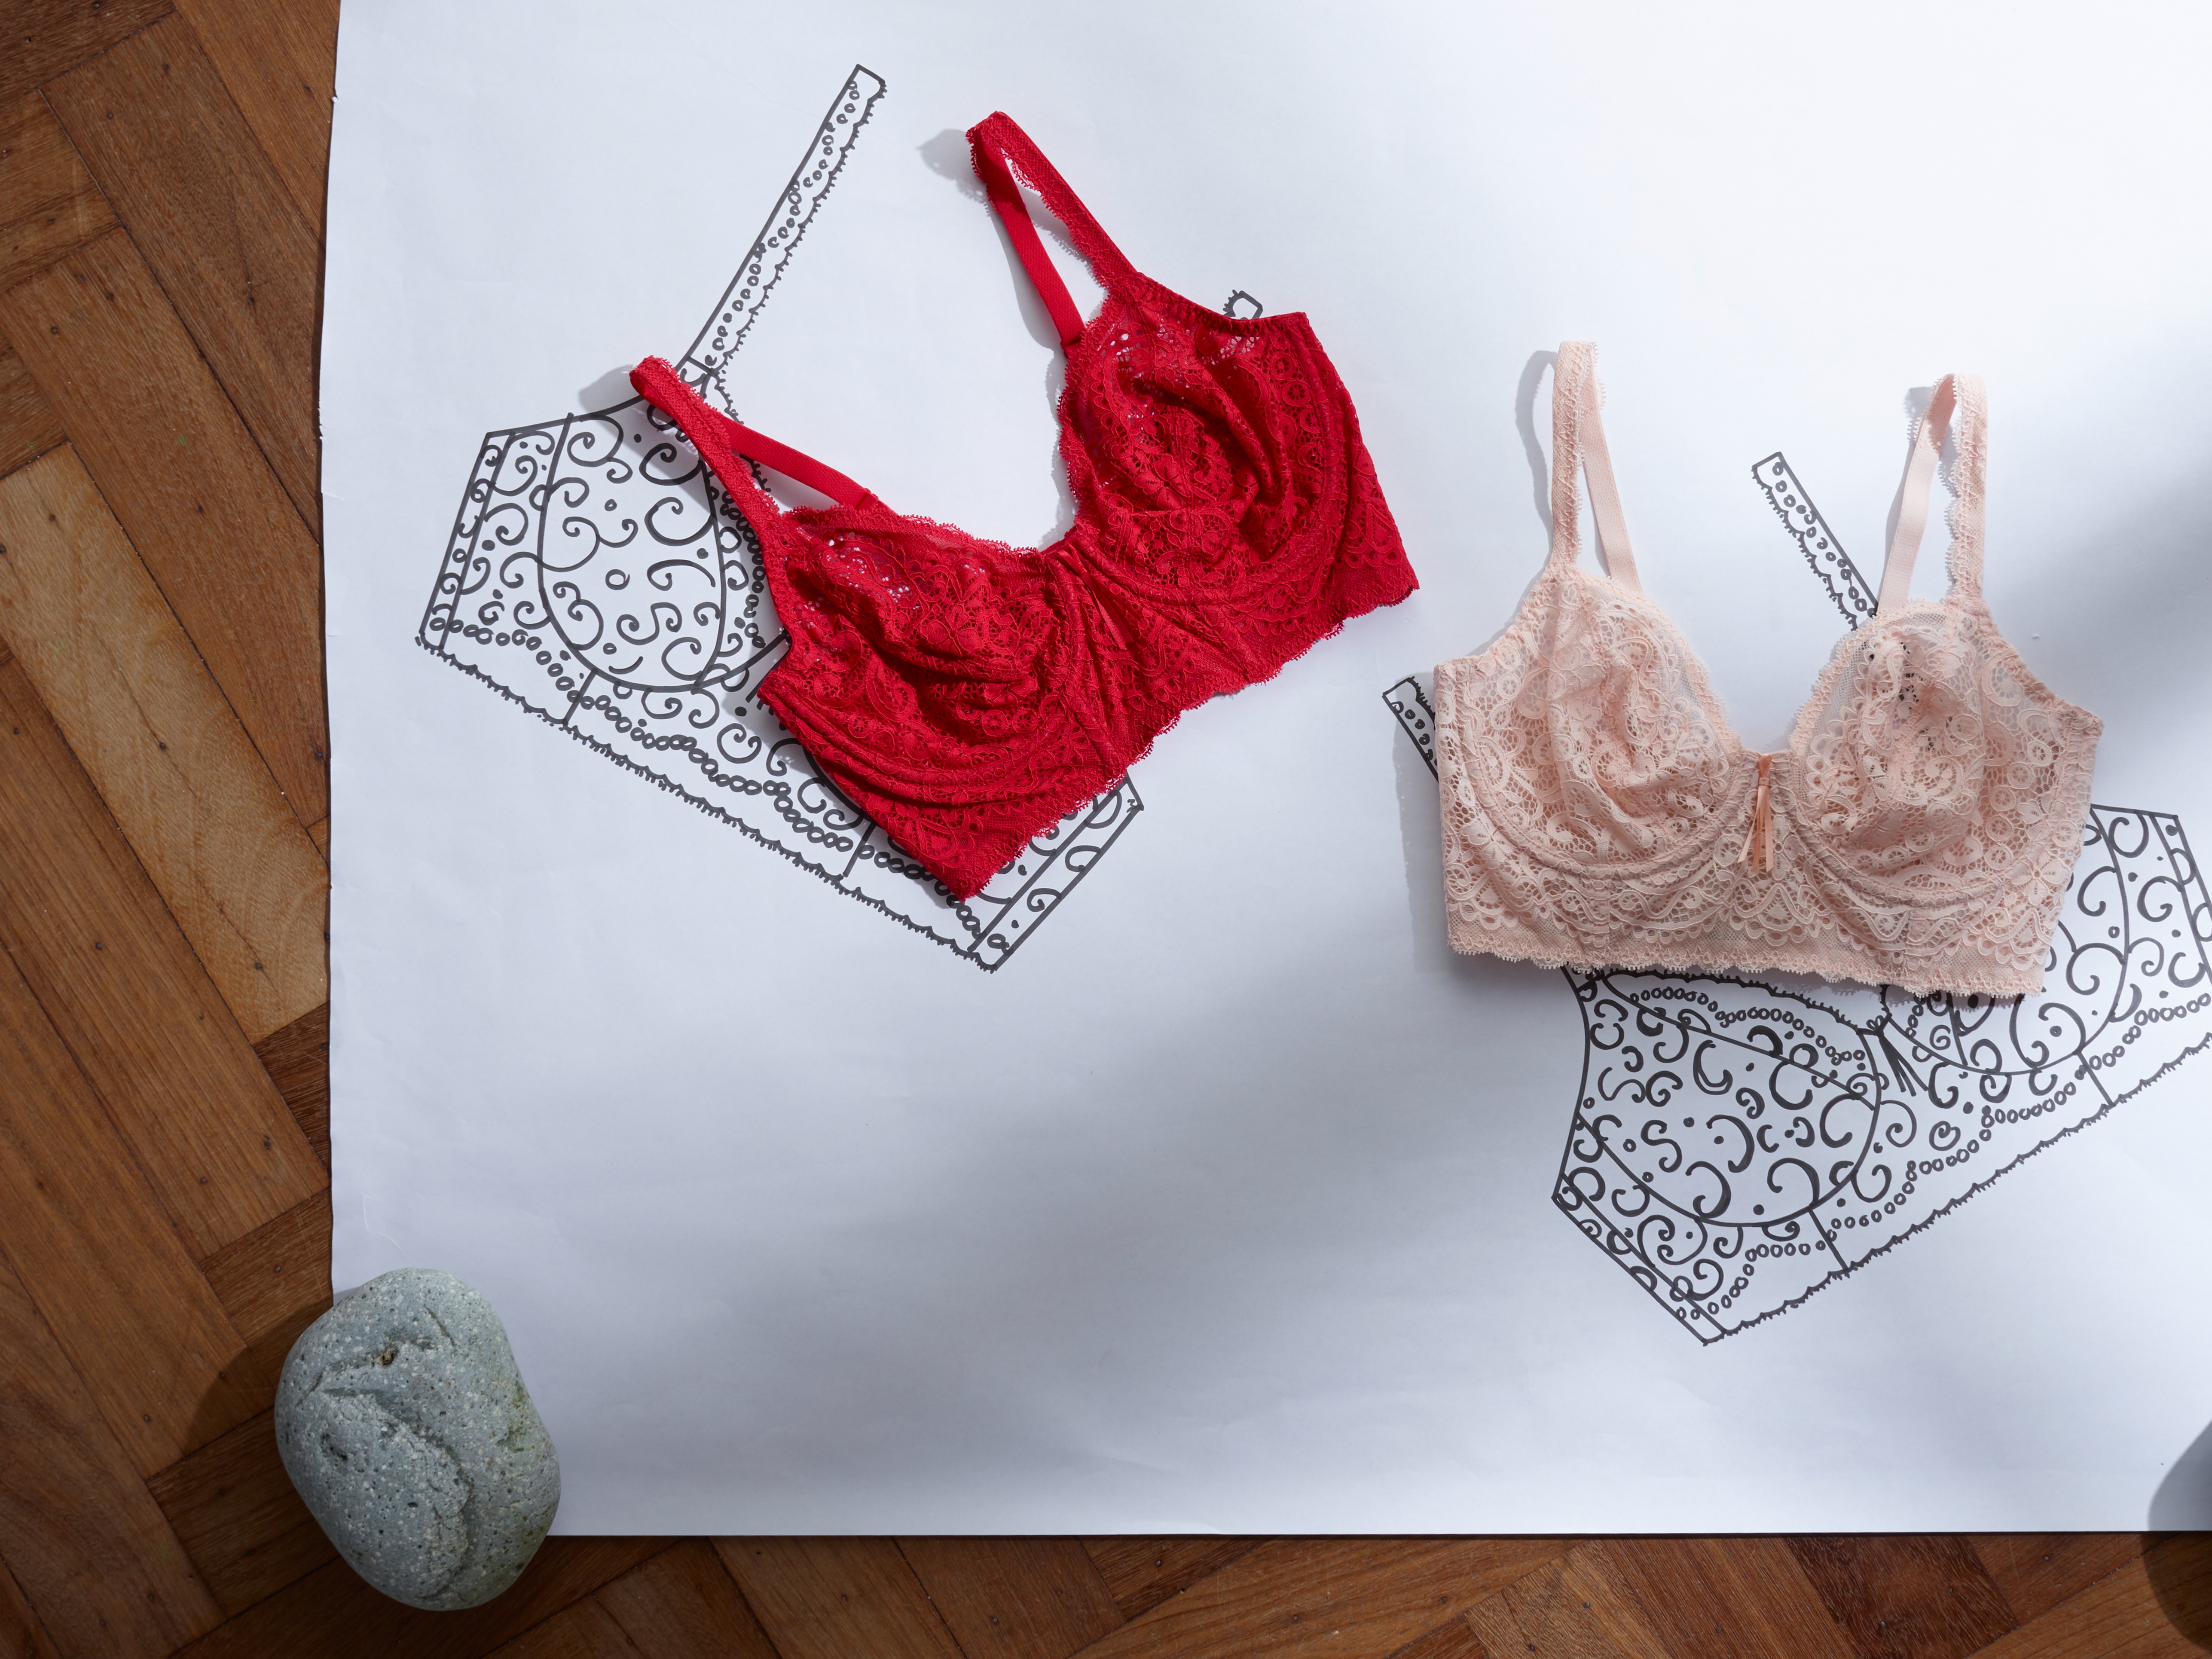 Every bra size has a sister size: This is how it works